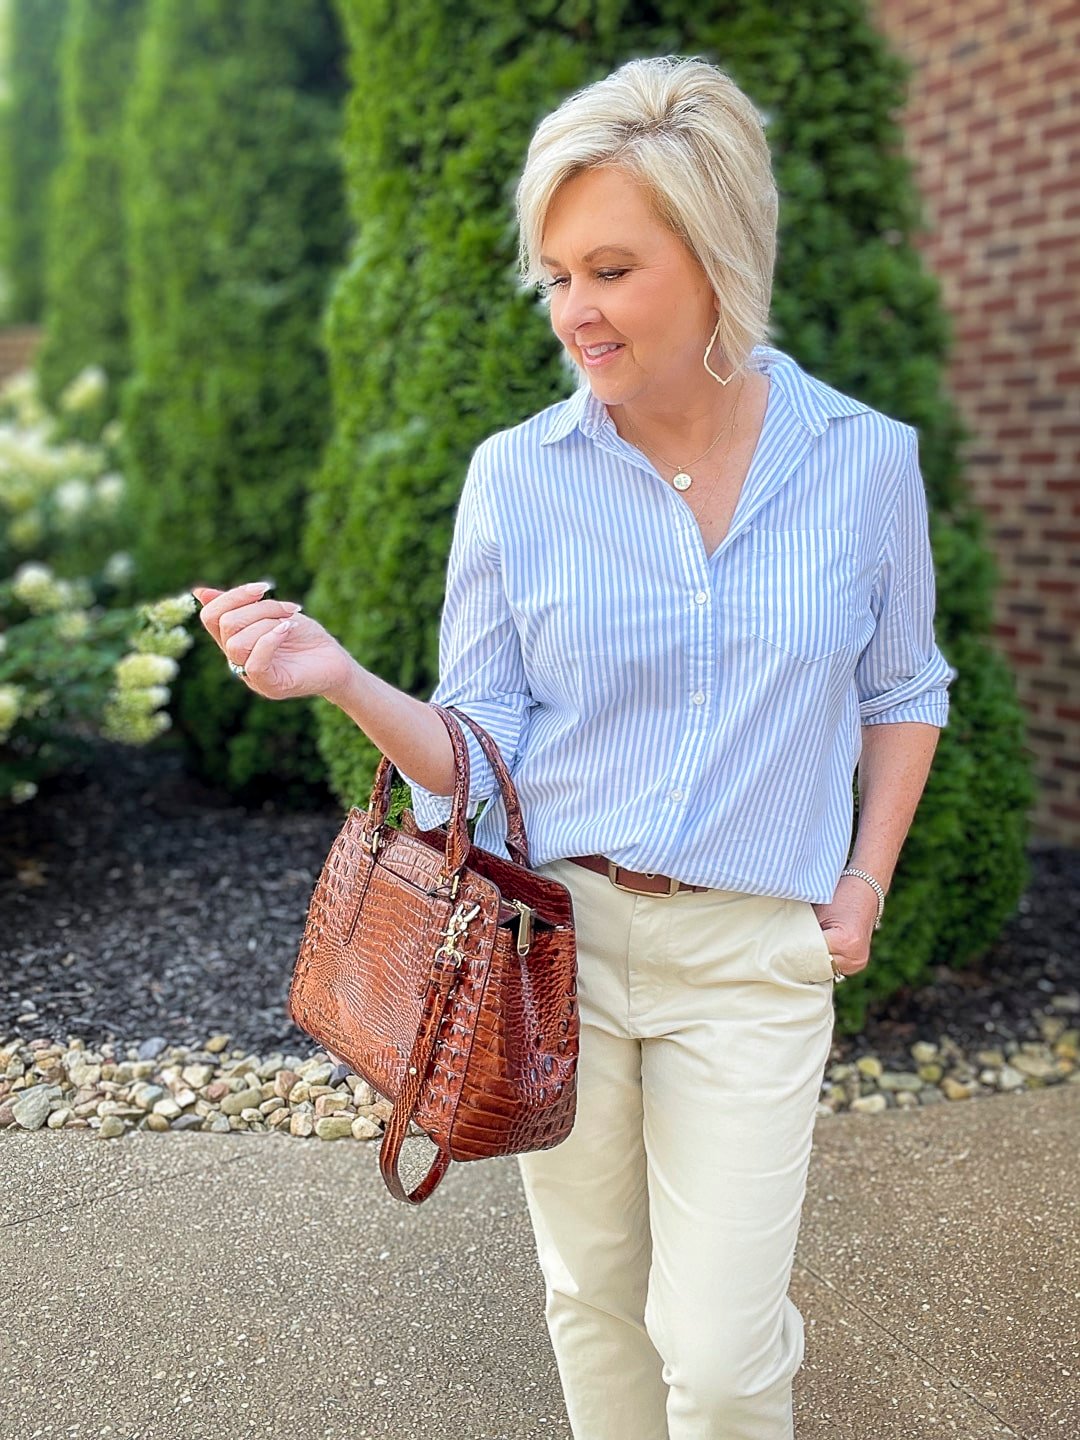 Over 40 Fashion Blogger, Tania Stephens is showing how to style Chinos and a striped shirt for summer10